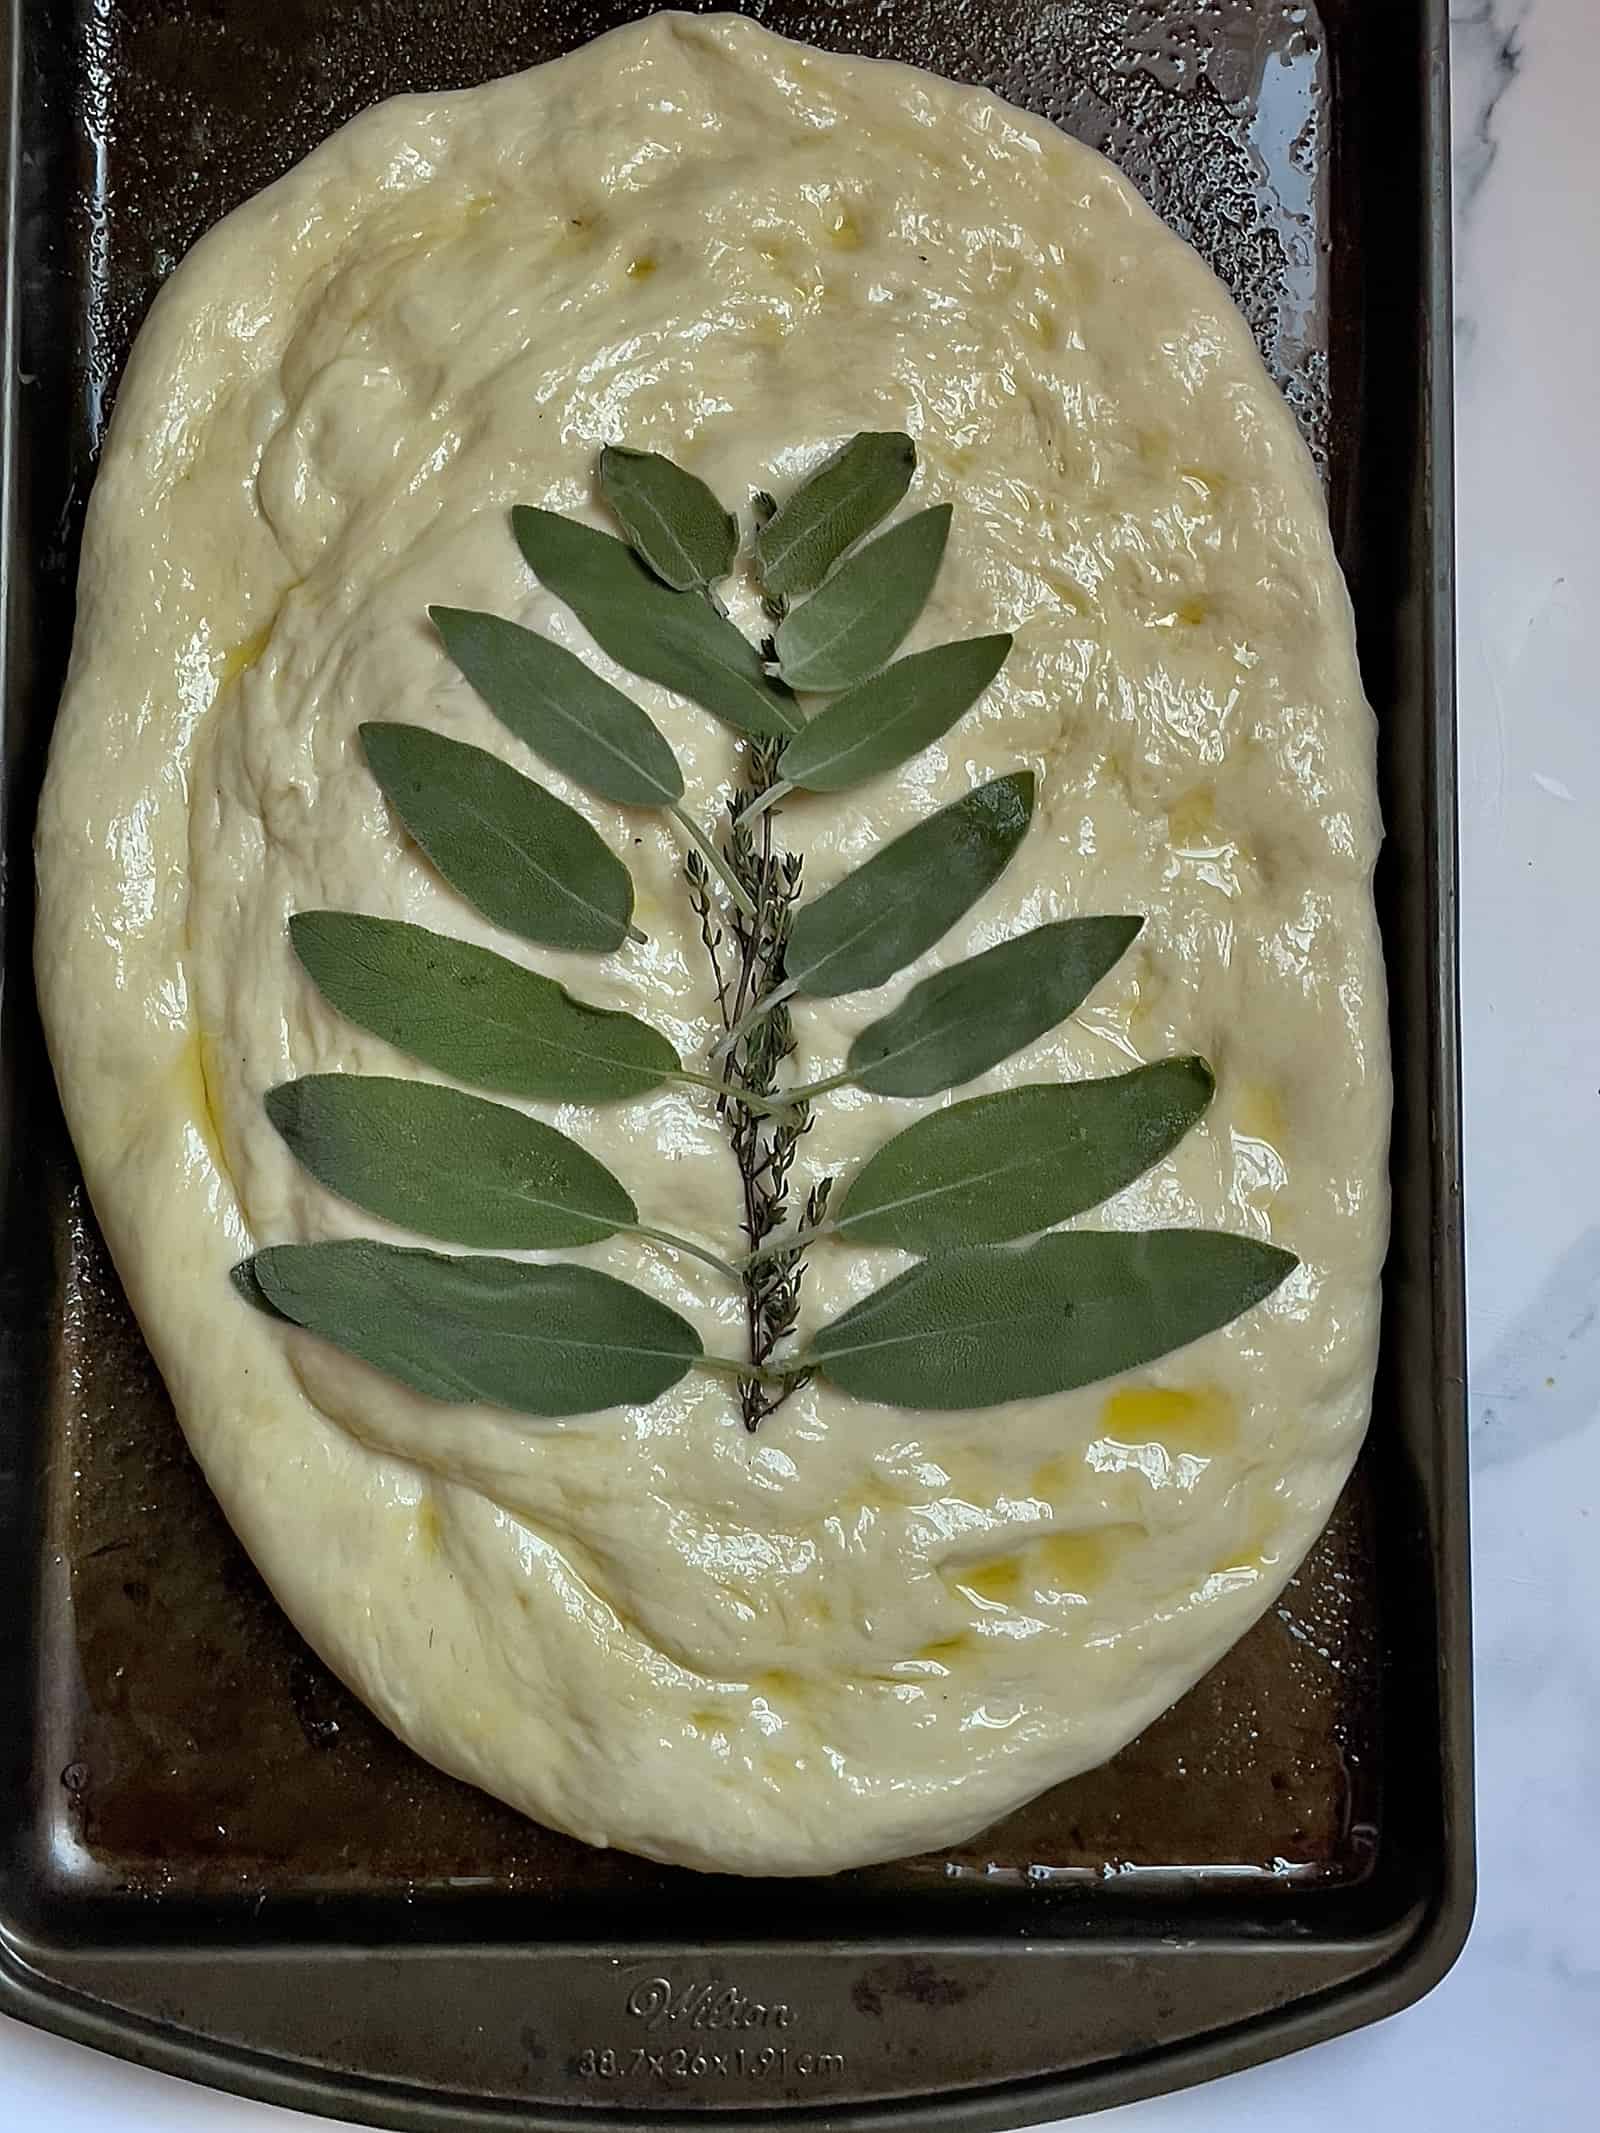 sage leaves spread out around a piece of thyme on focaccia bread